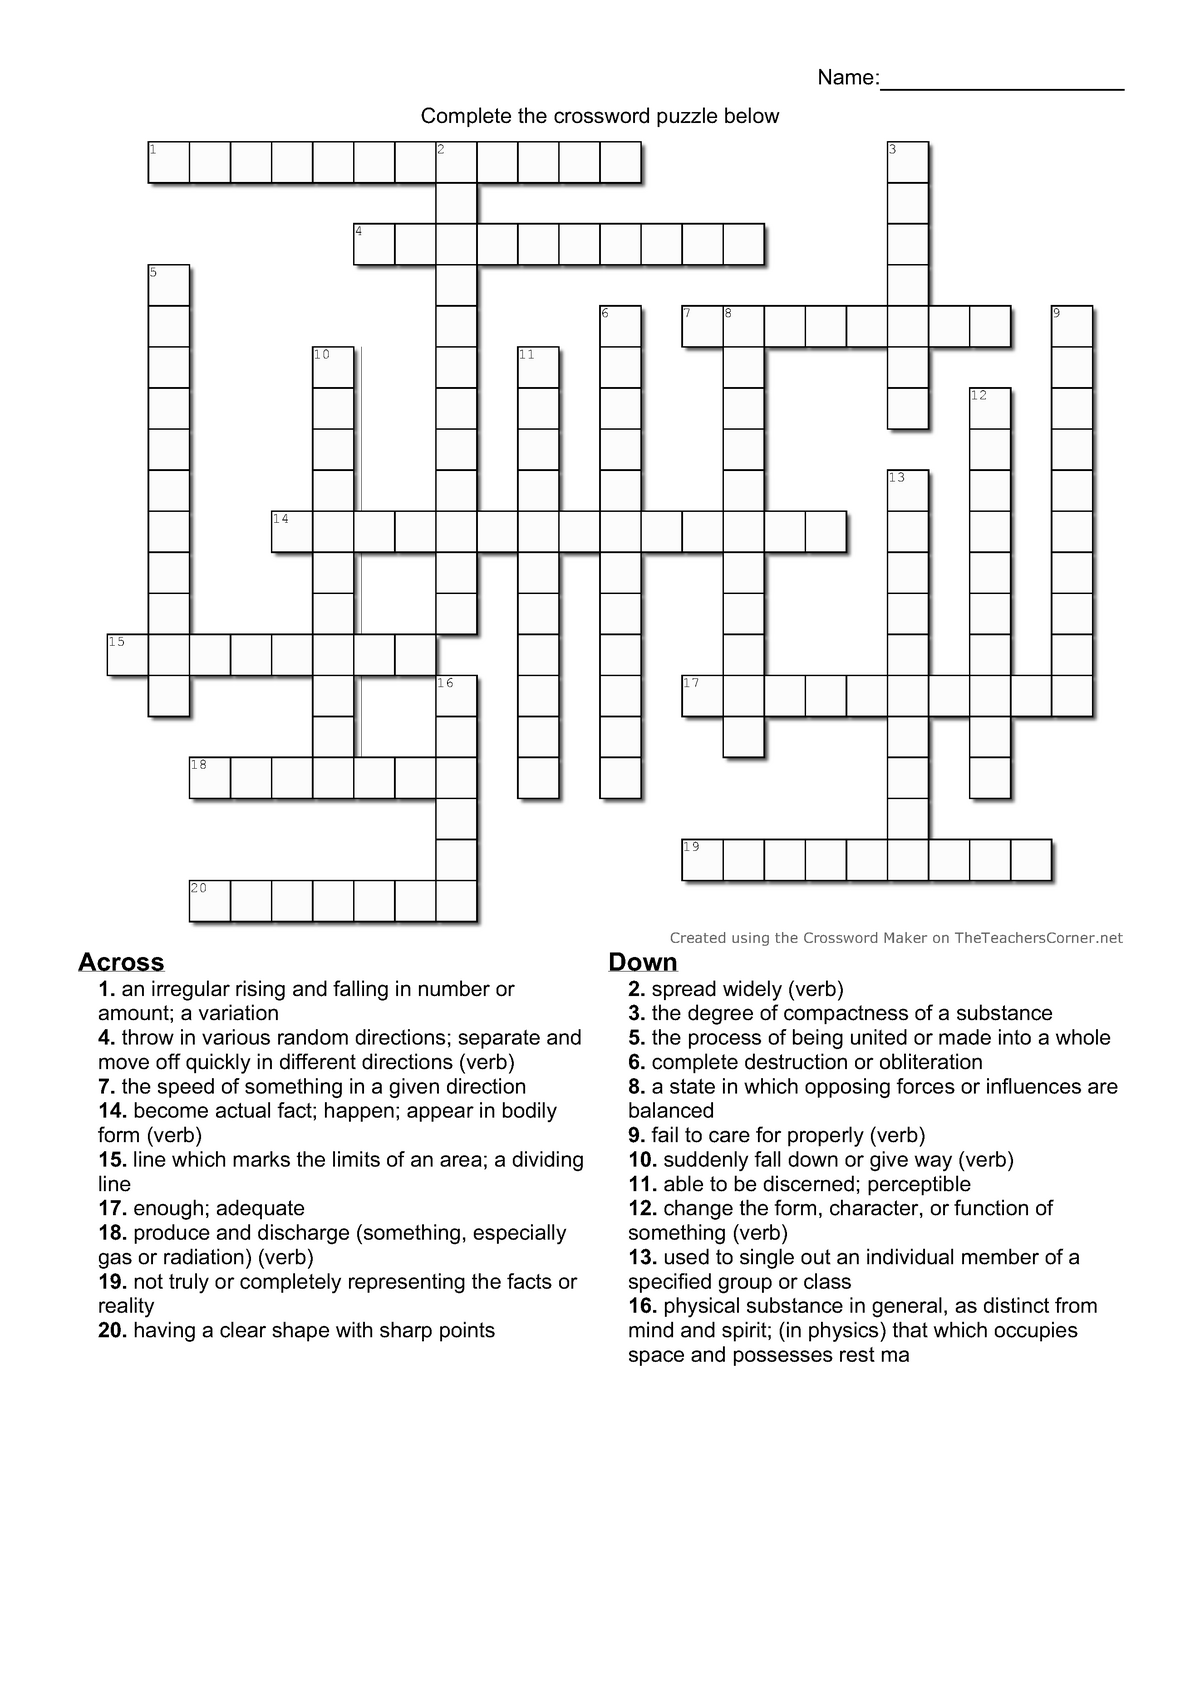 Meh free entry plks Complete the crossword puzzle below Name: 1 2 3 4